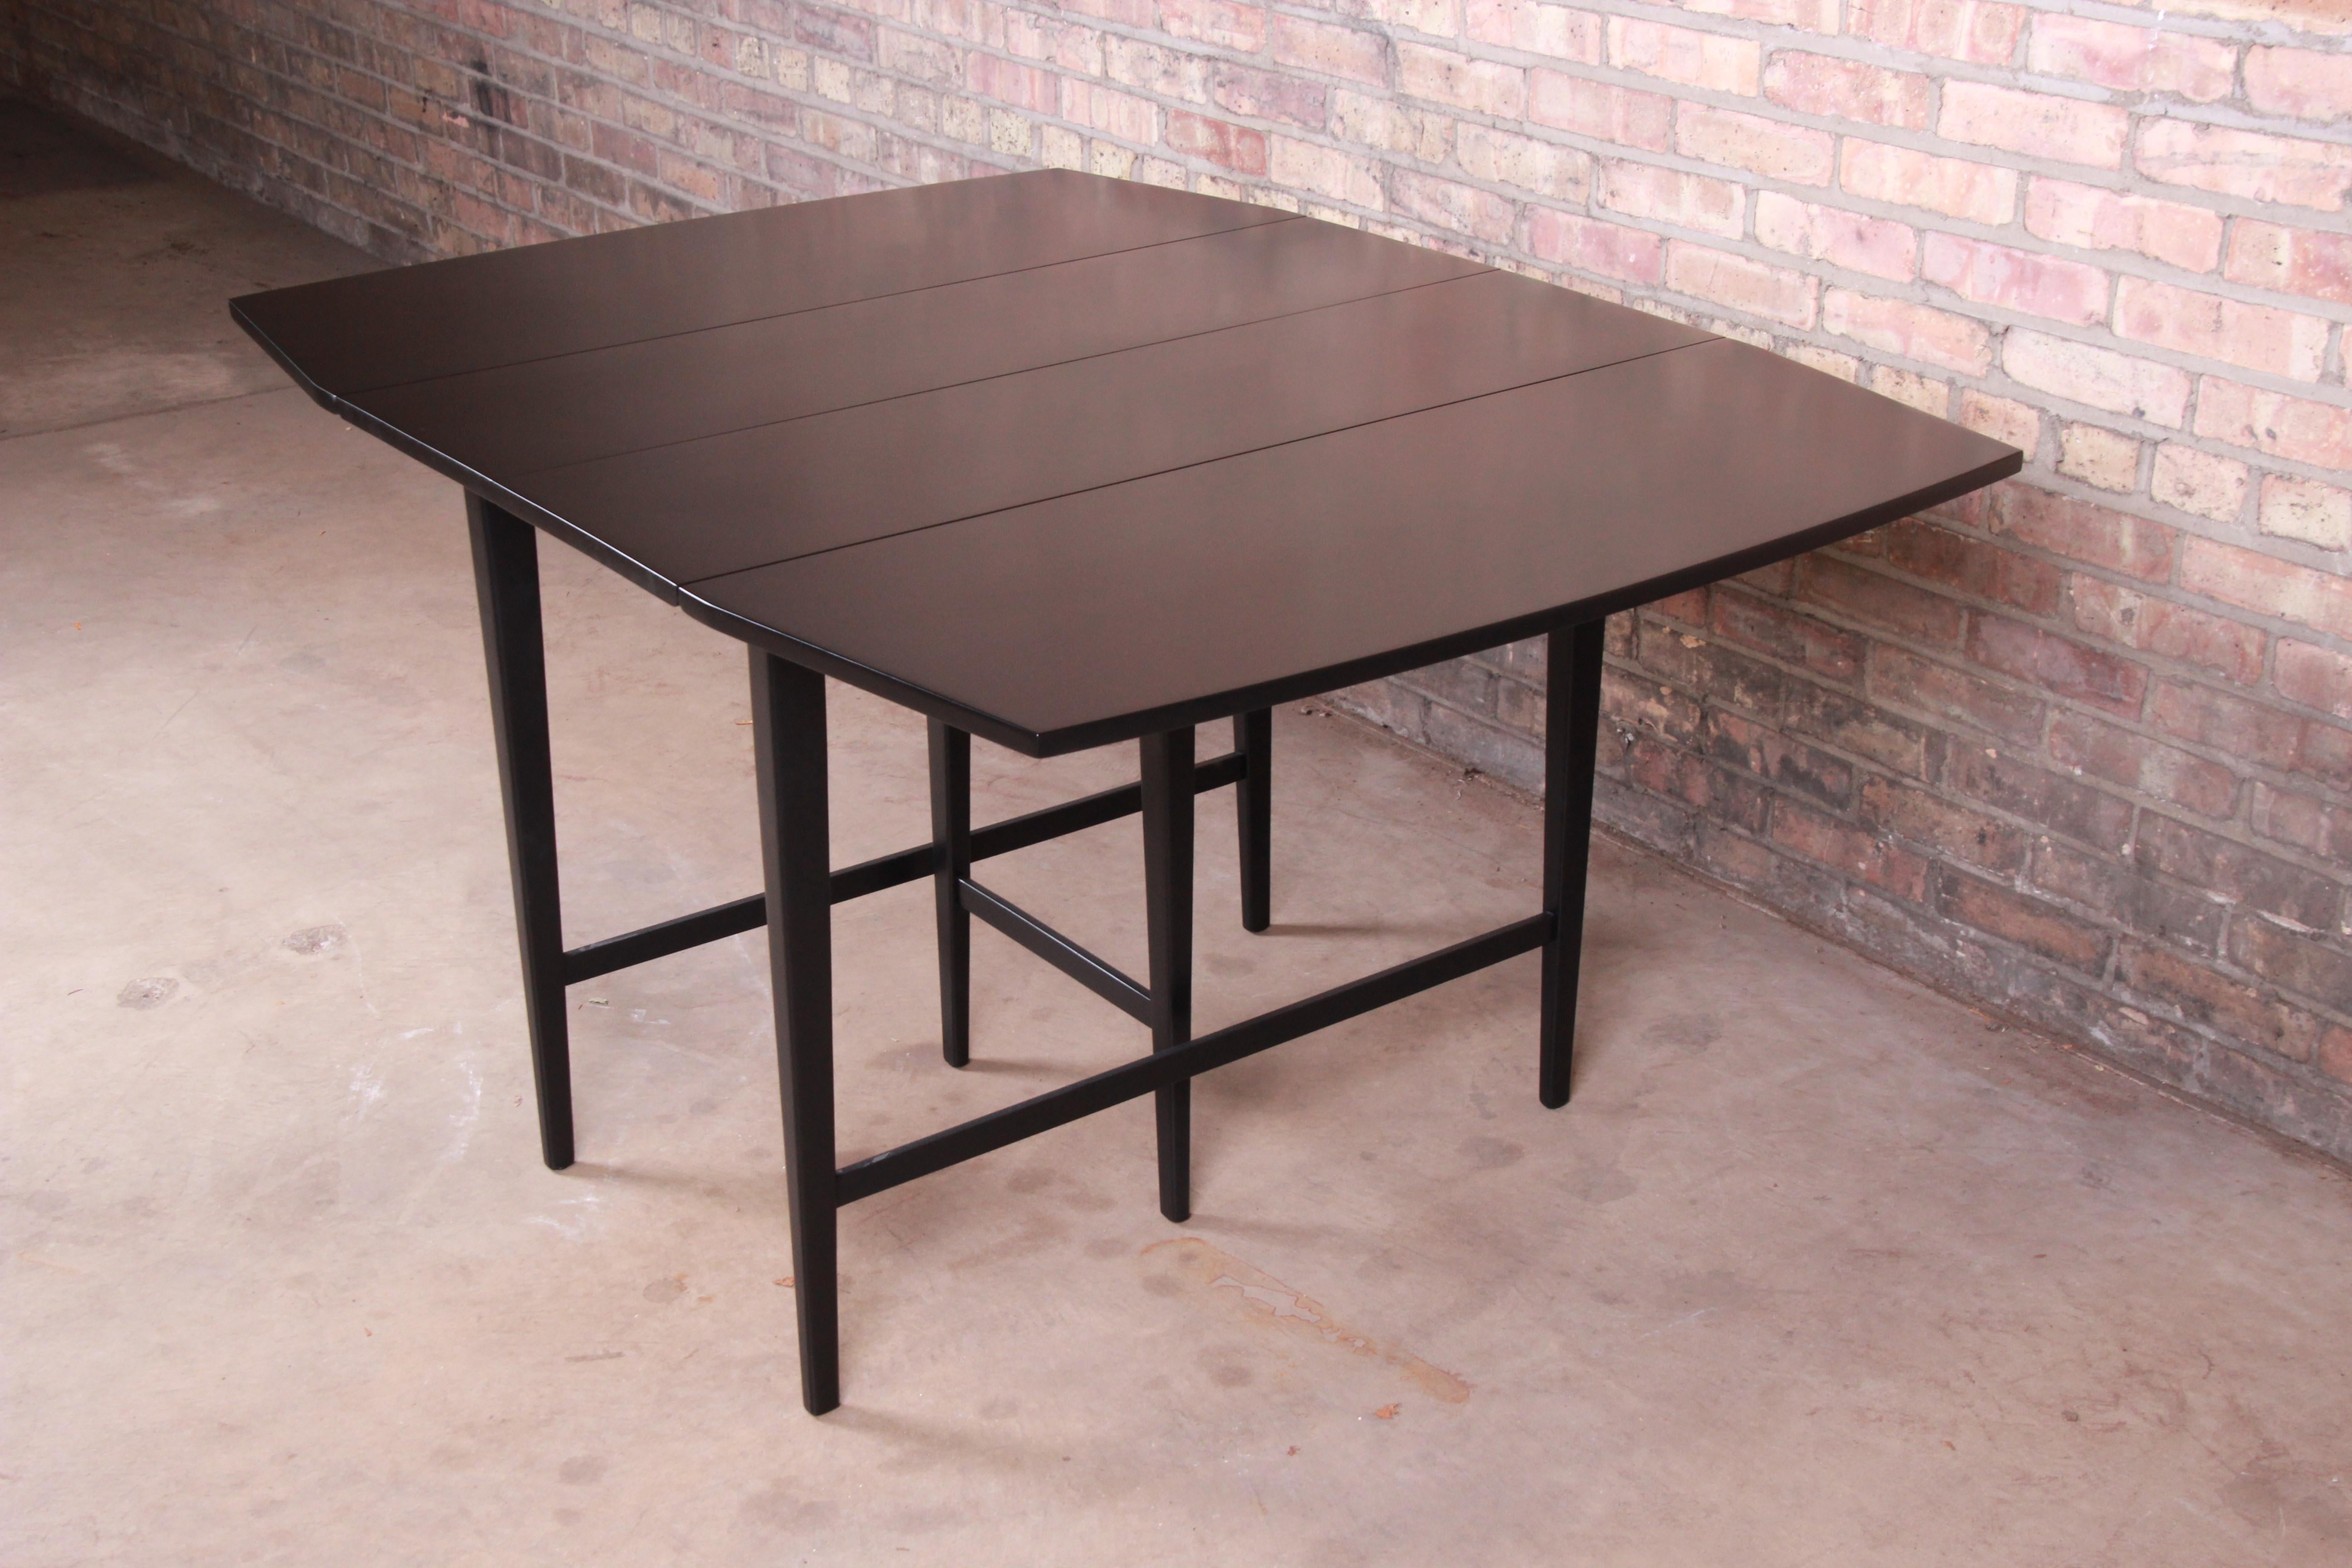 Paul McCobb Planner Group Mid-Century Modern Black Lacquered Dining Table, 1950s For Sale 2